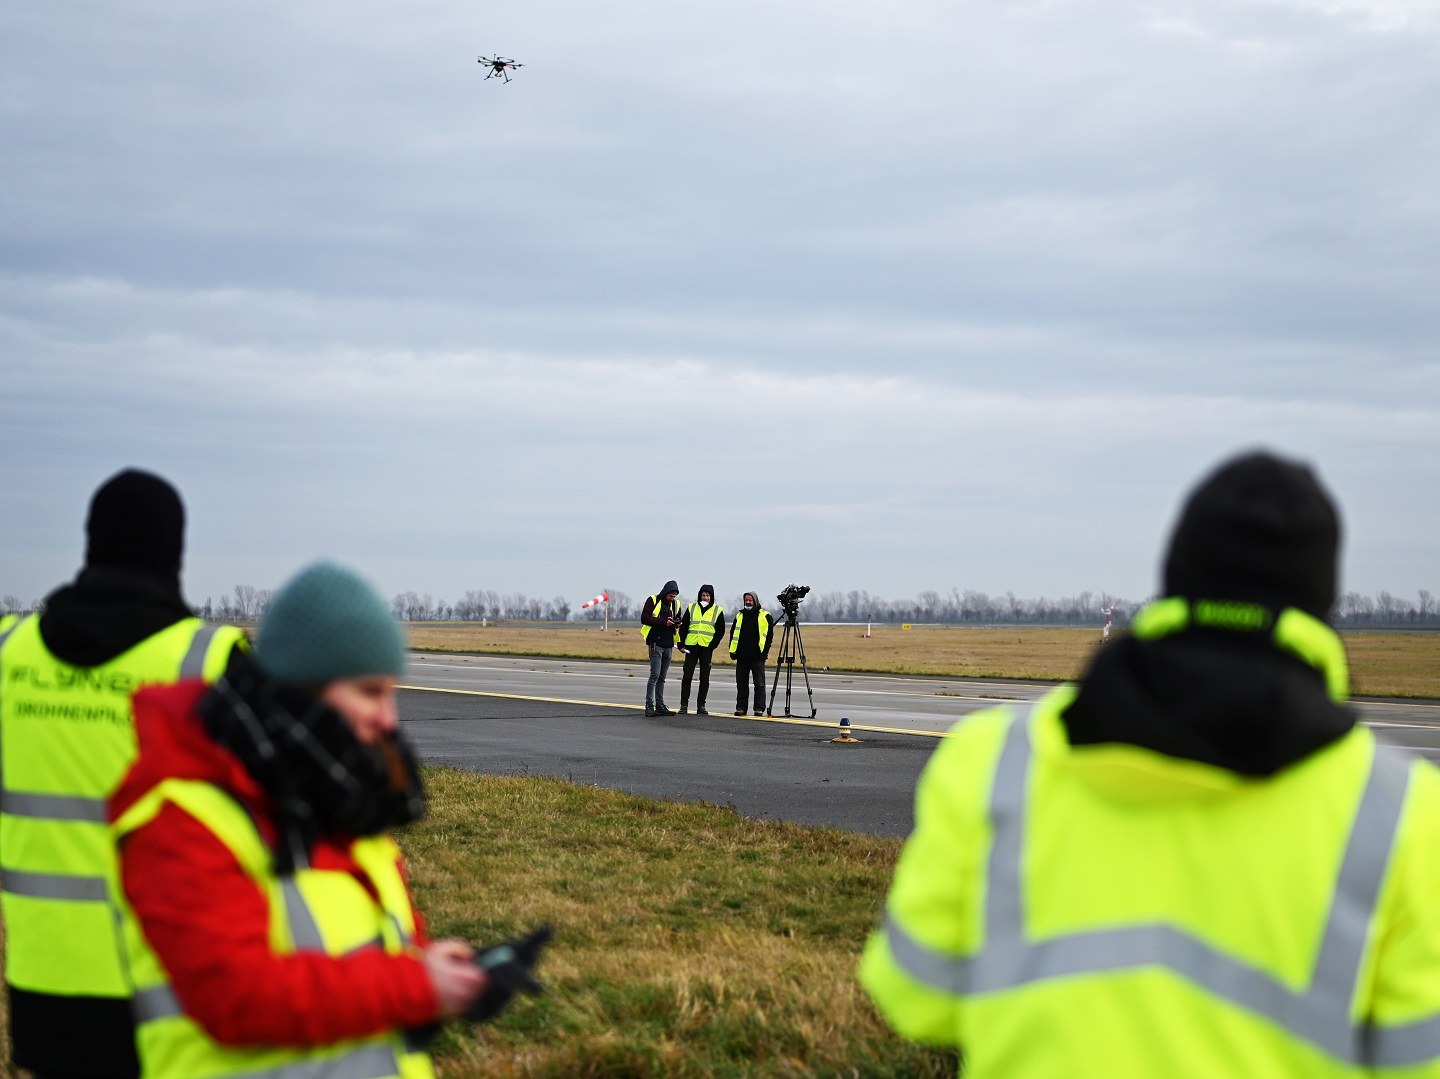 Flight tests with real and virtual drones